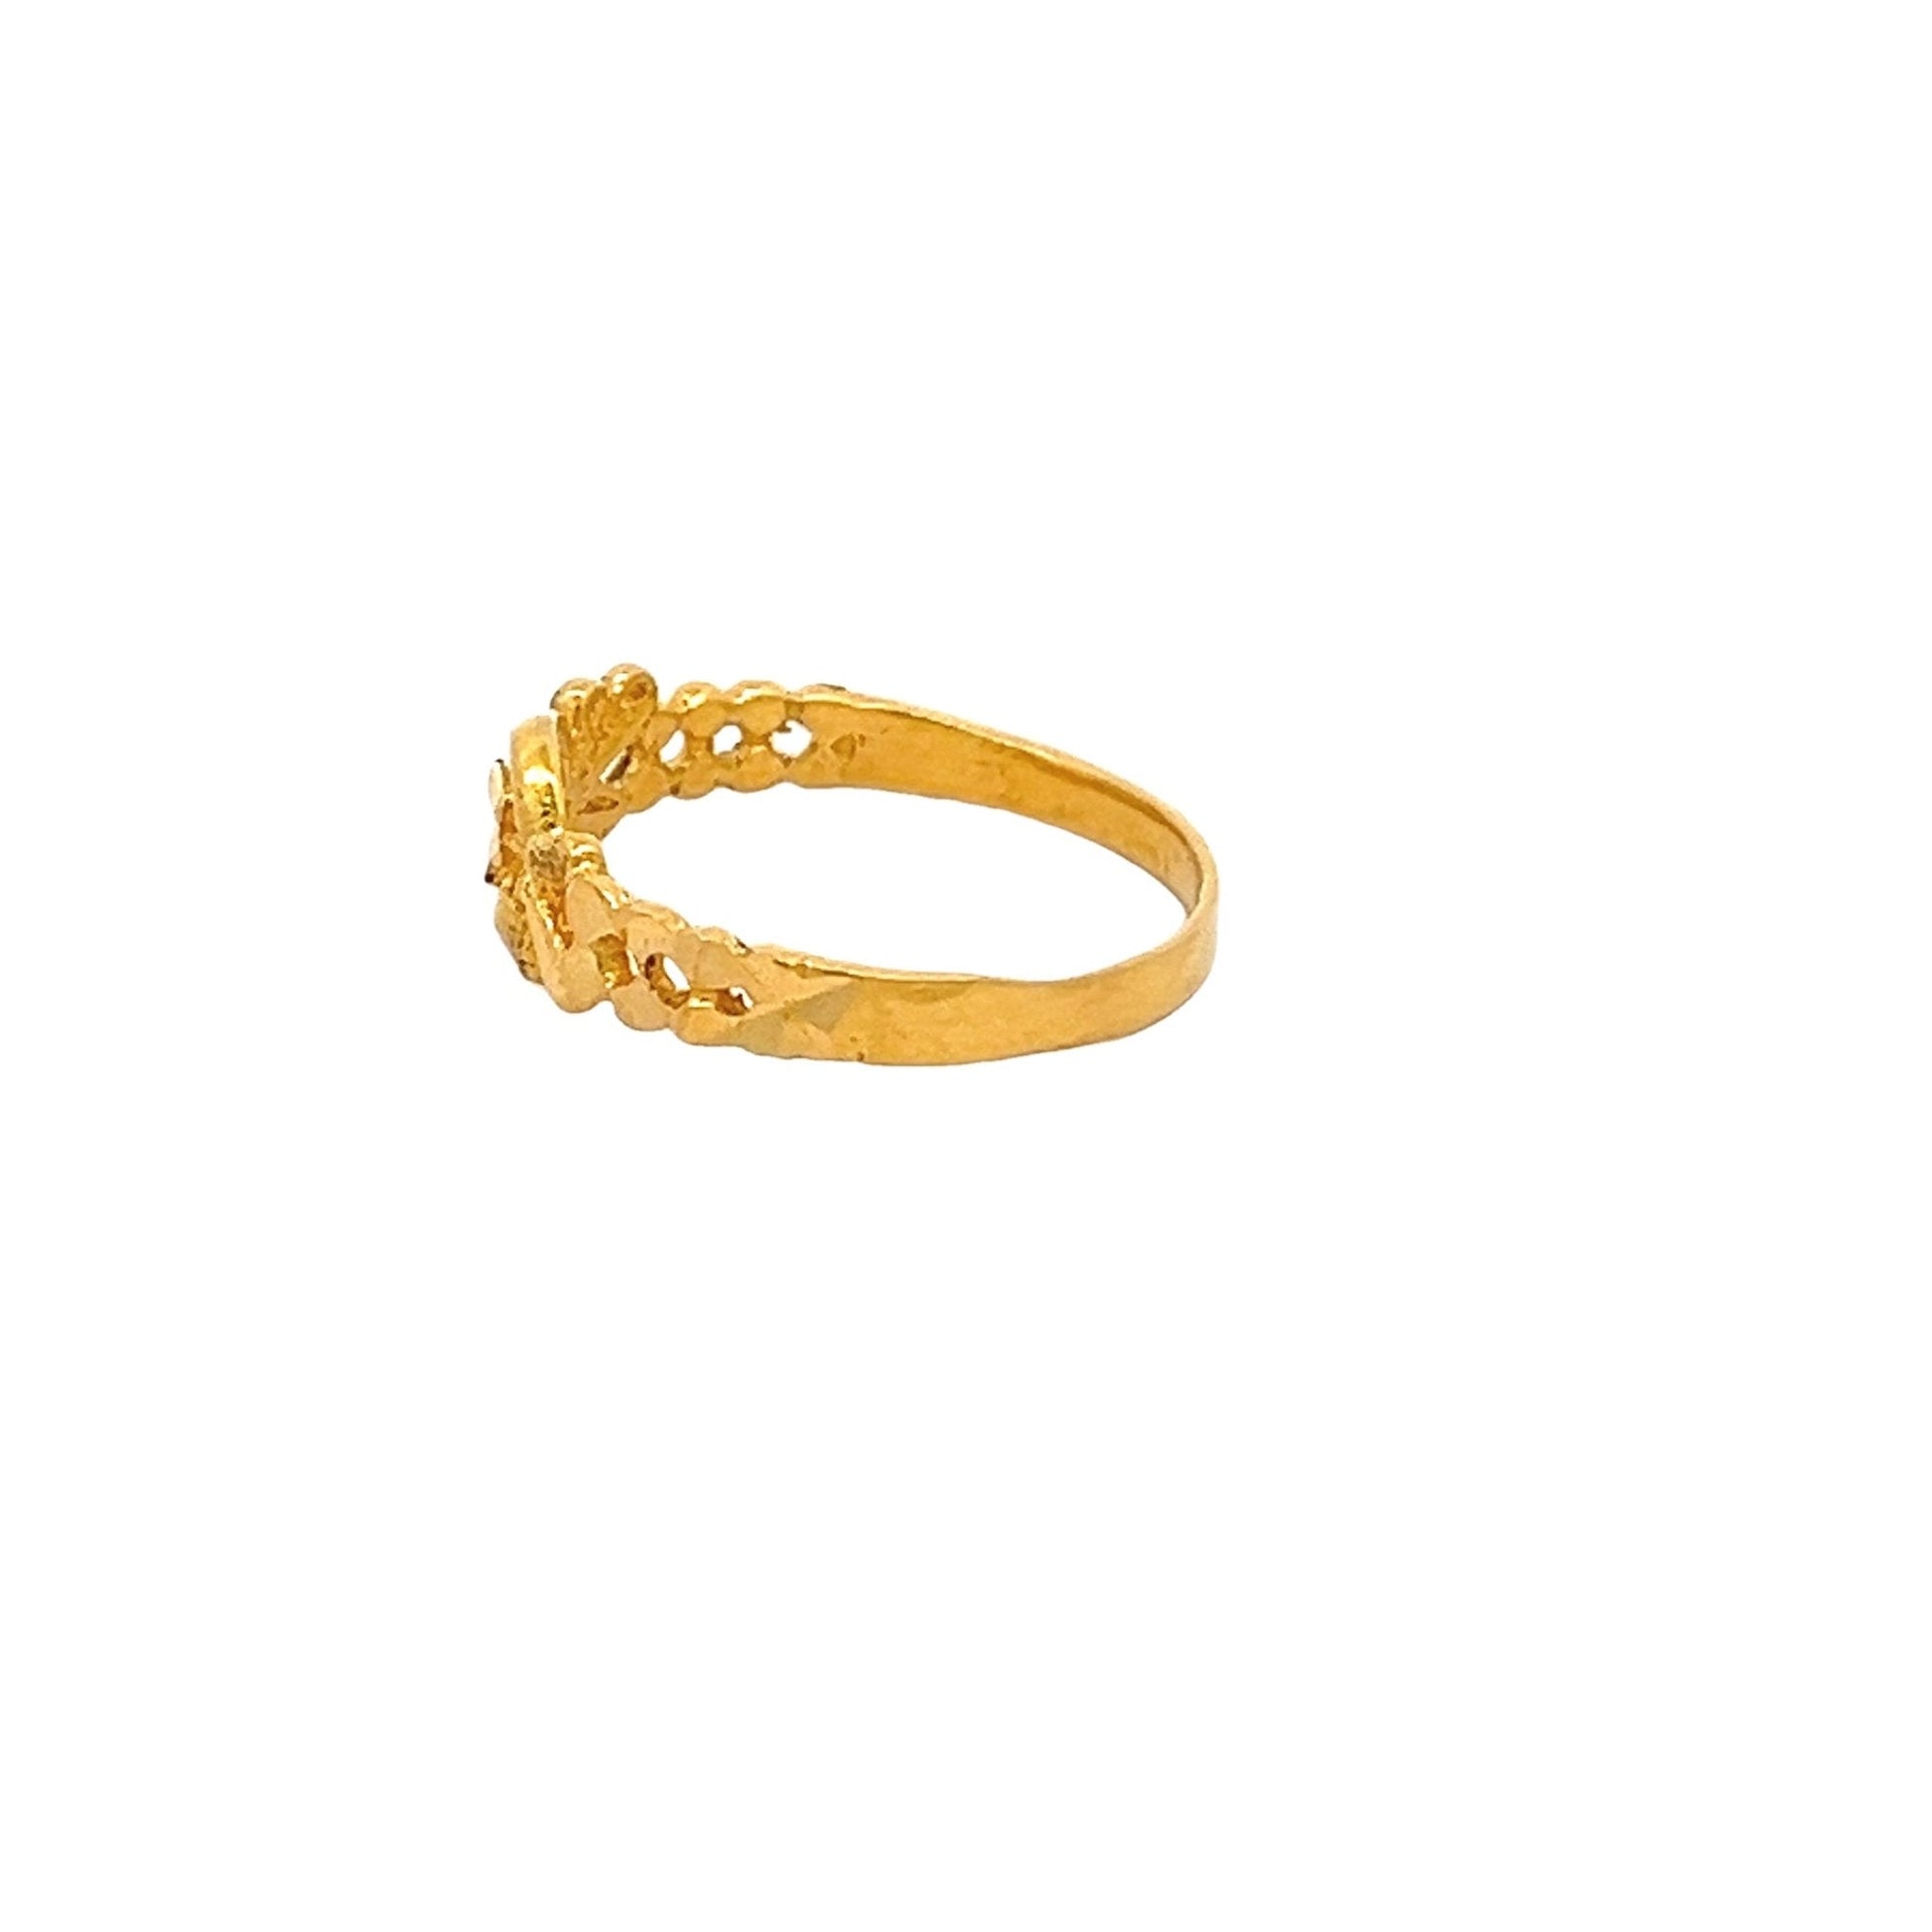 22ct solid yellow gold ring with heart 05001308RingRetroGold